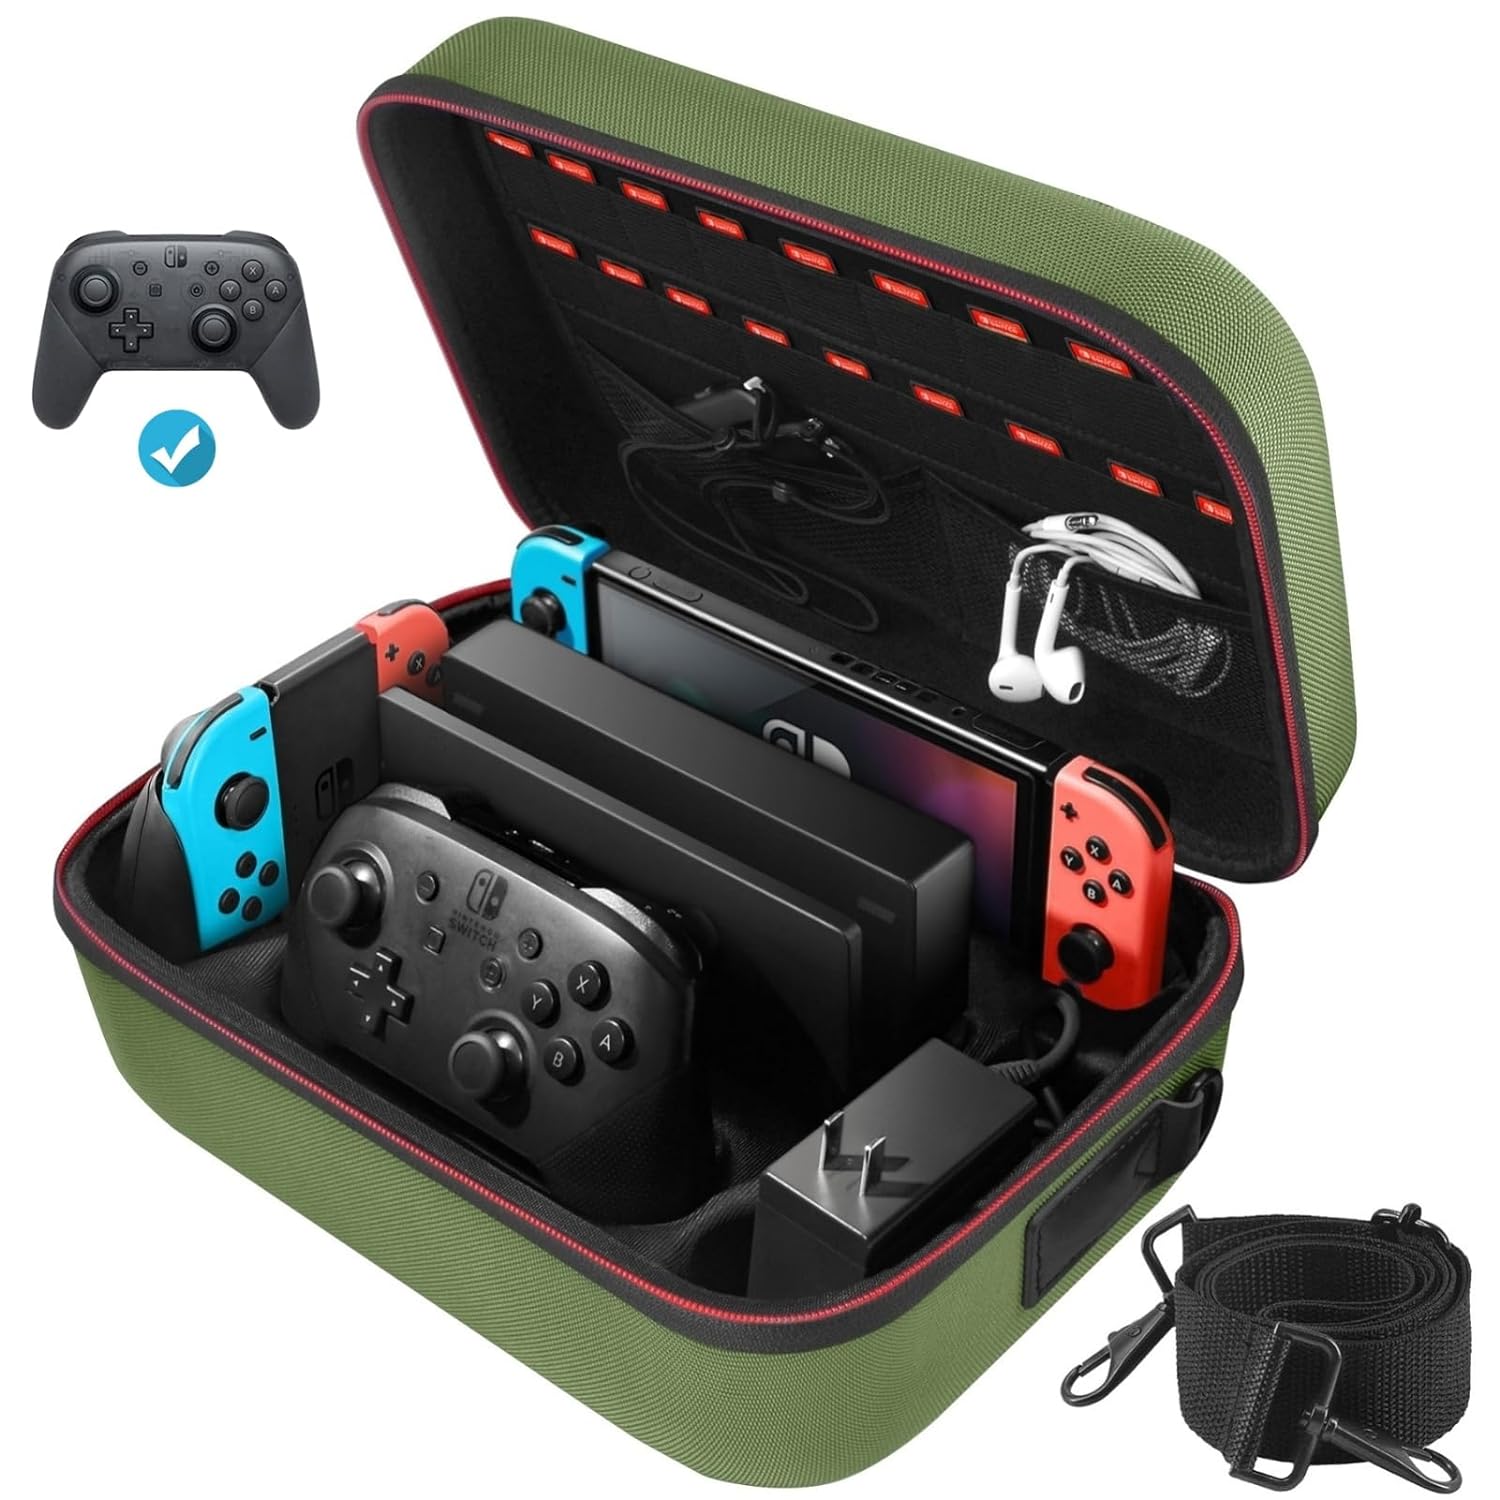 Switch Box Nintendo Switch and Switch OLED model, portable fully protected carry travel bag 20 game card storage Switch console Pro Controller Accessory Green